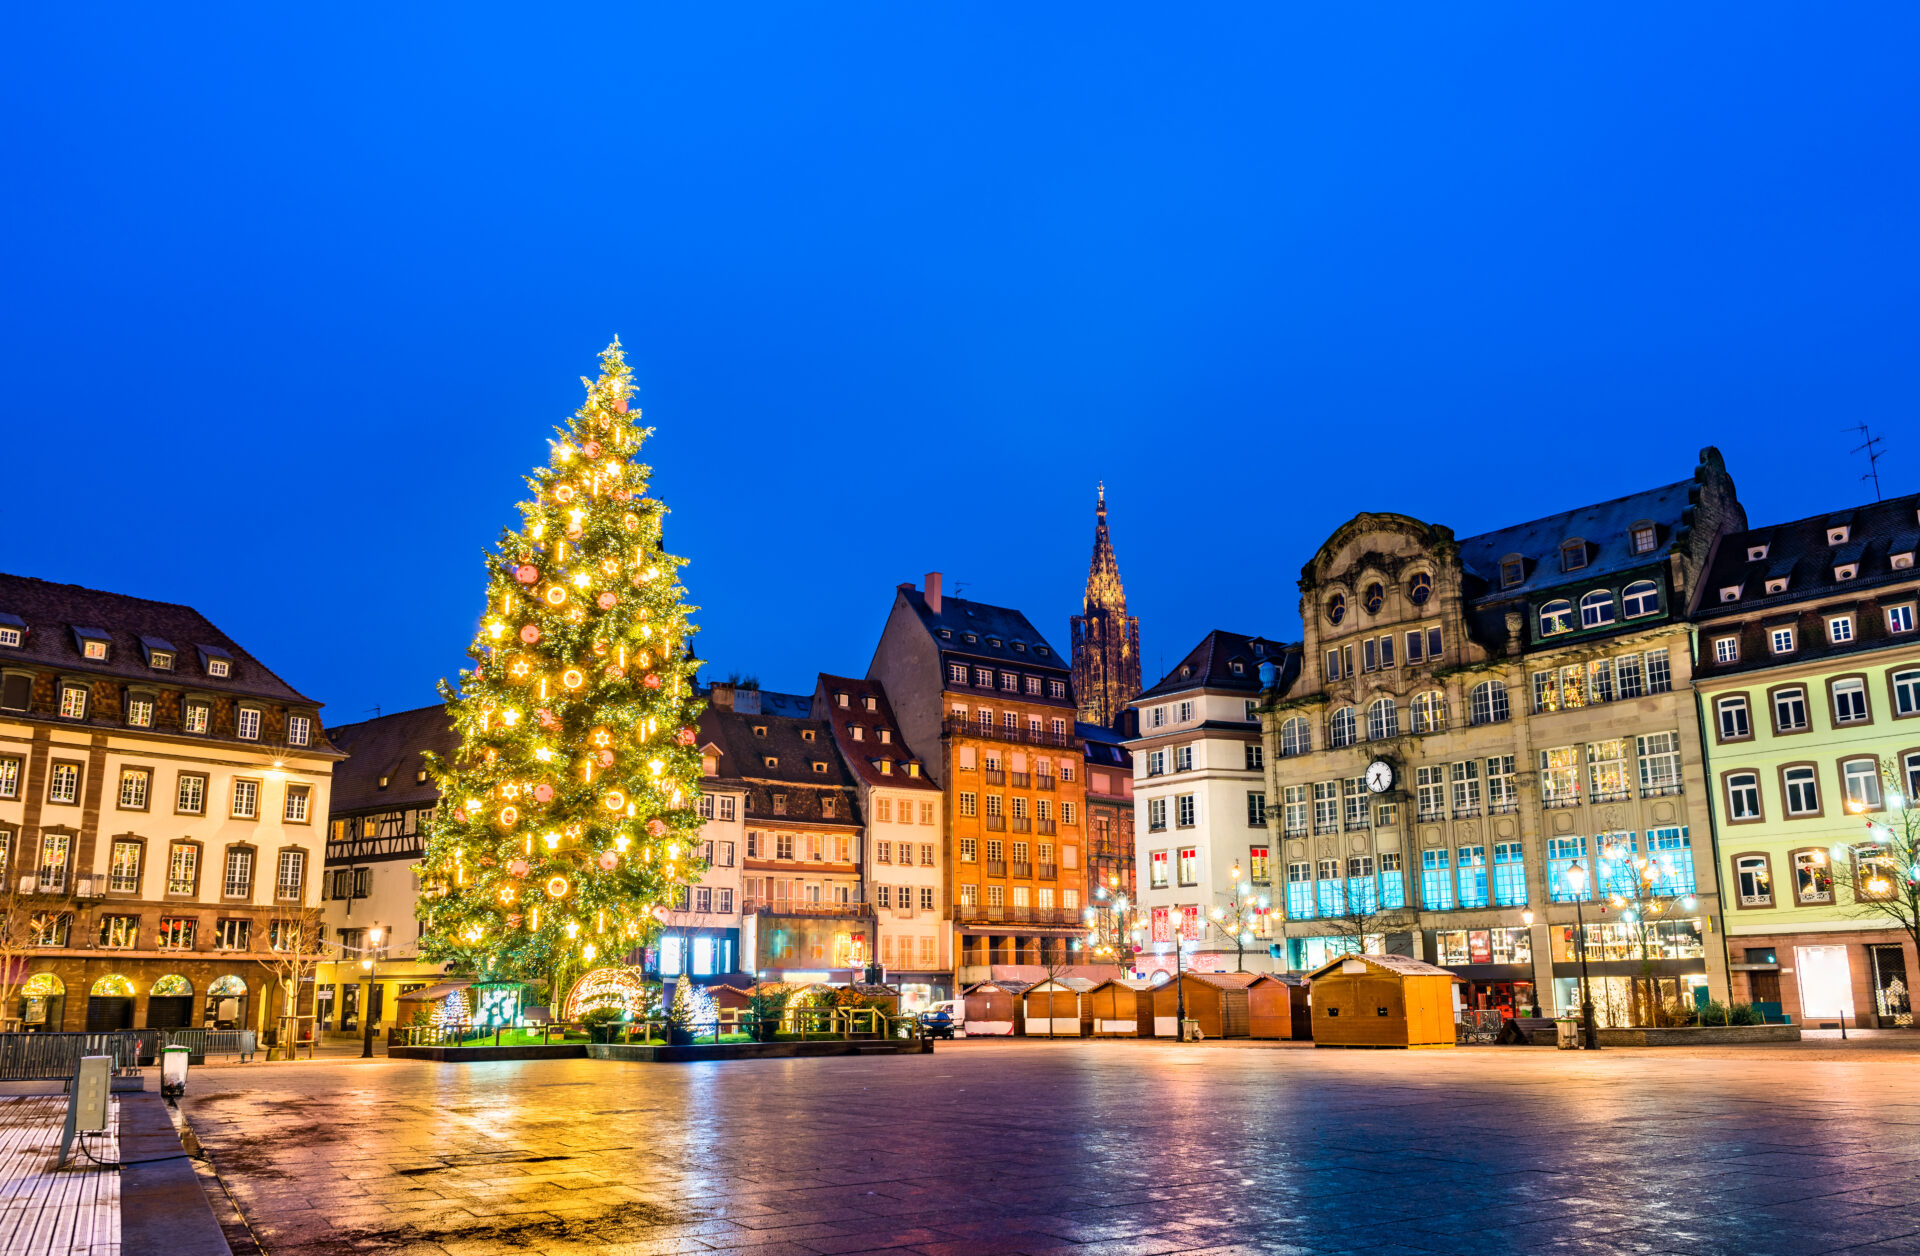 French Christmas markets